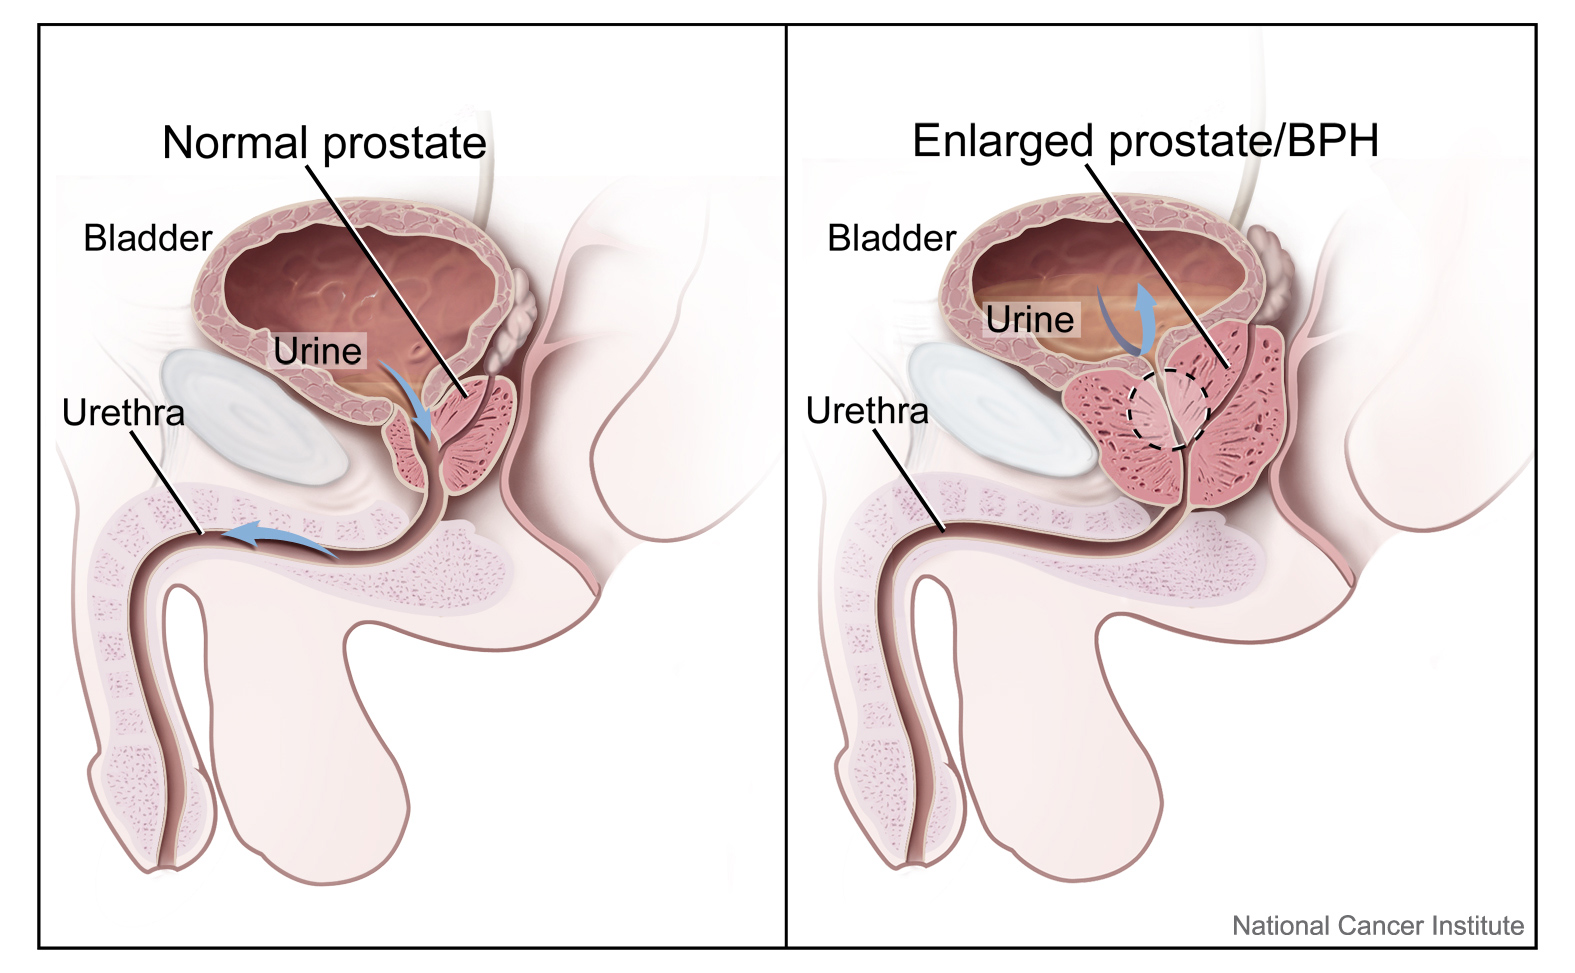 Prostate (normal and Enlarged) image